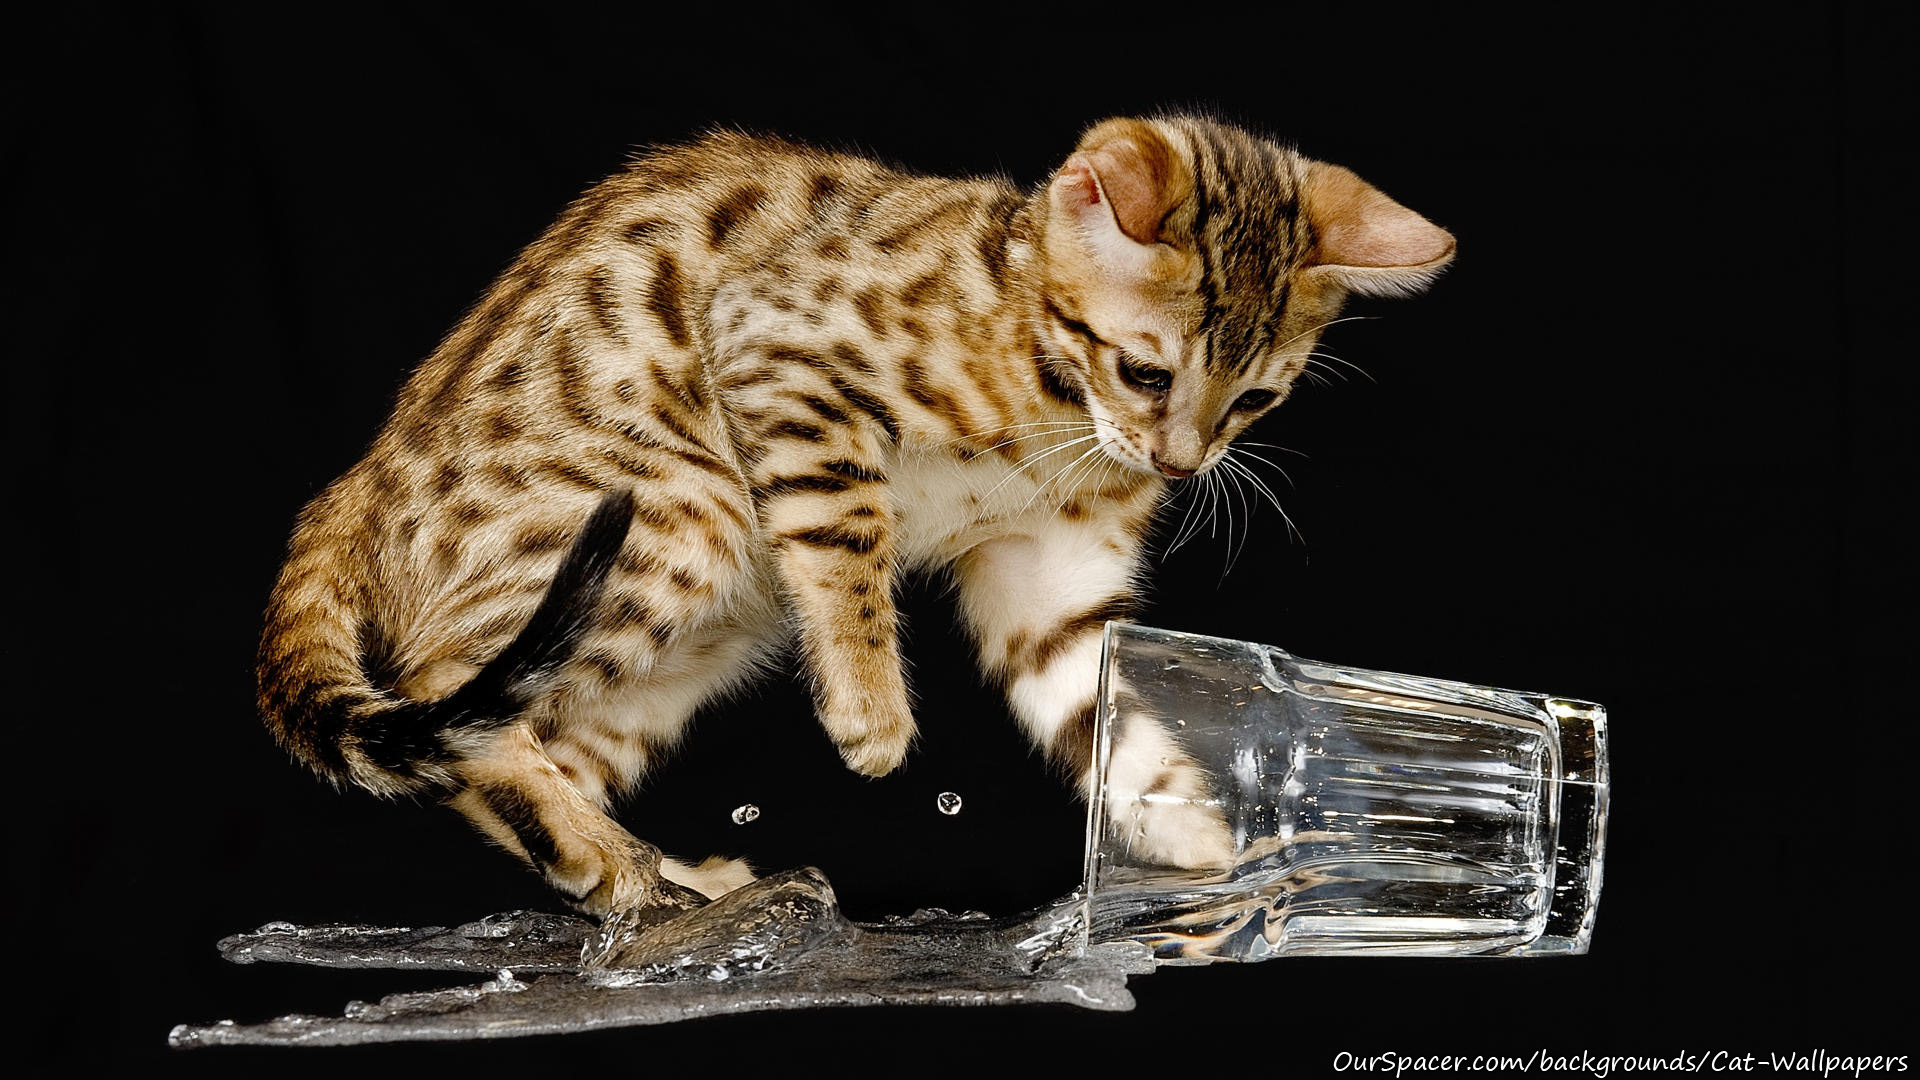 Tiger cat dropped a glass of water wallpapers for myspace, twitter, and hi5 backgrounds